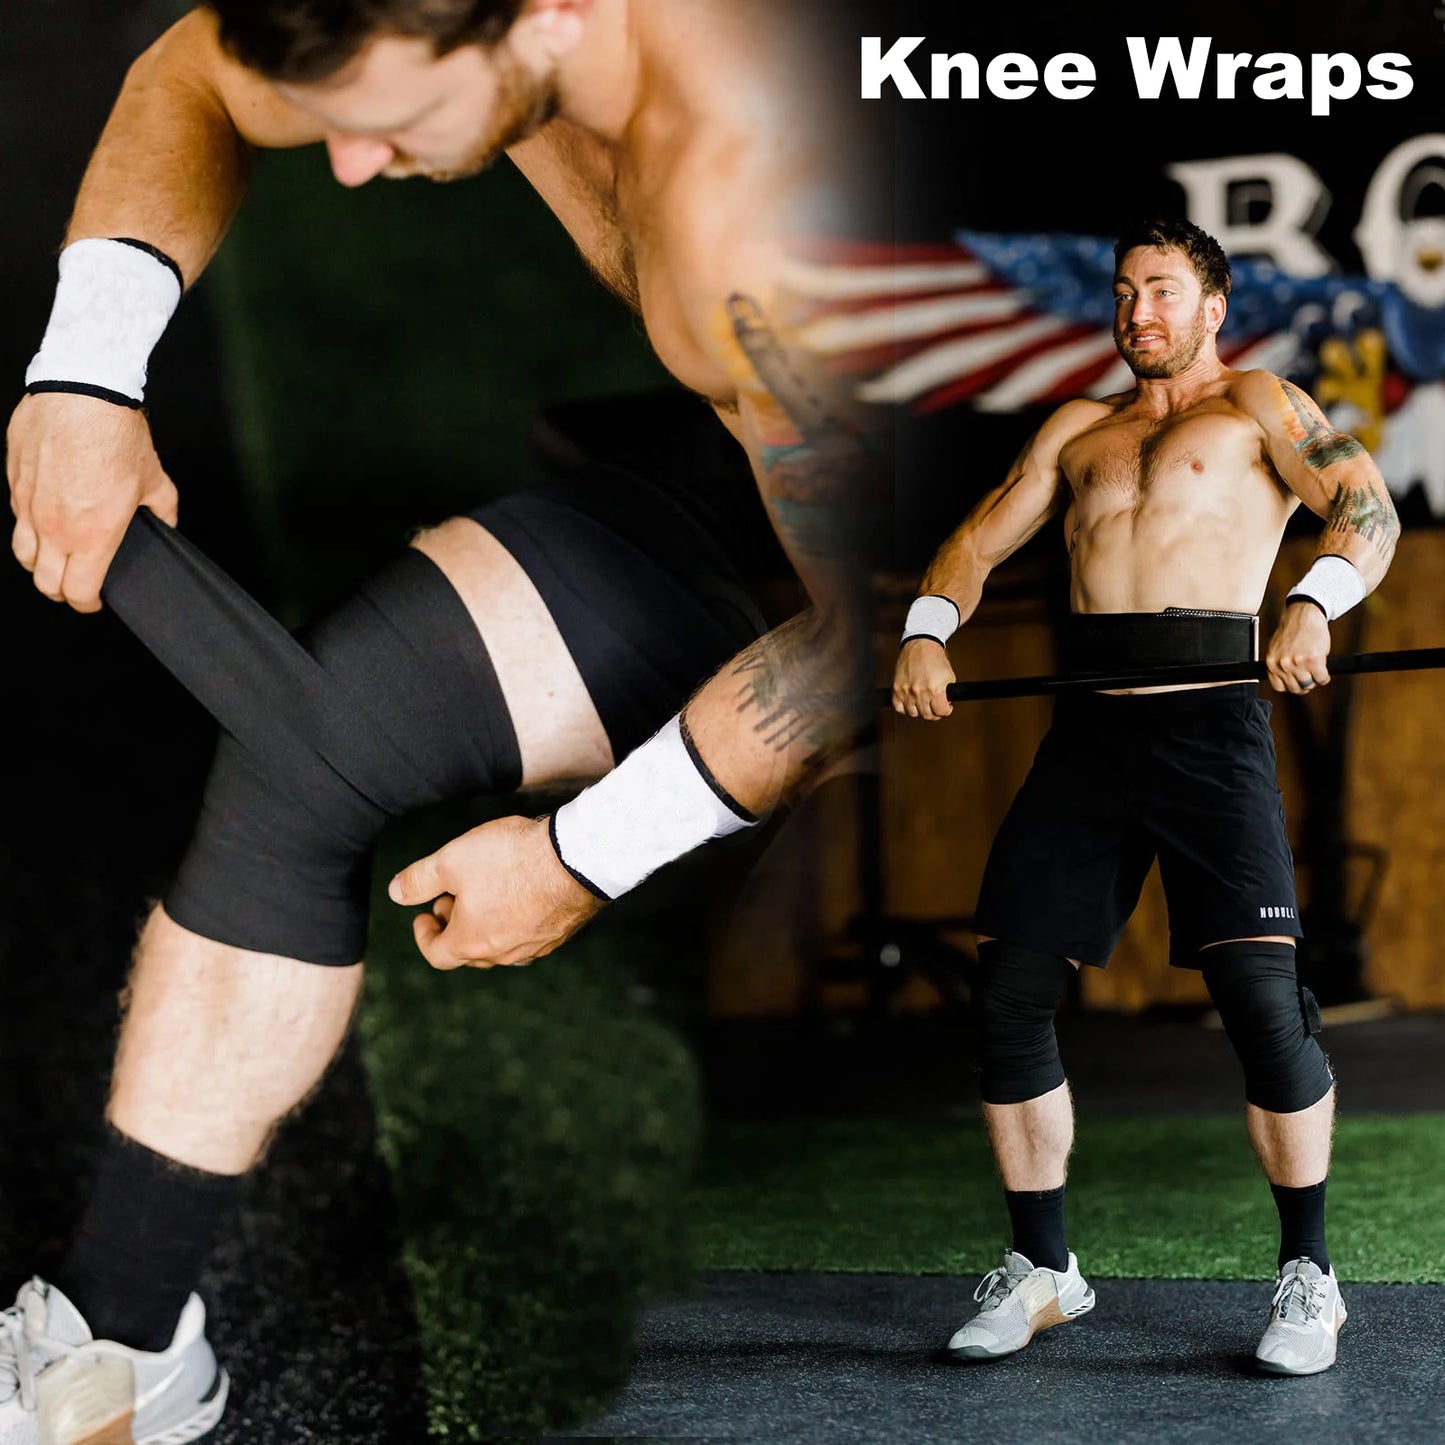 Weight Lifting Knee Wraps Support